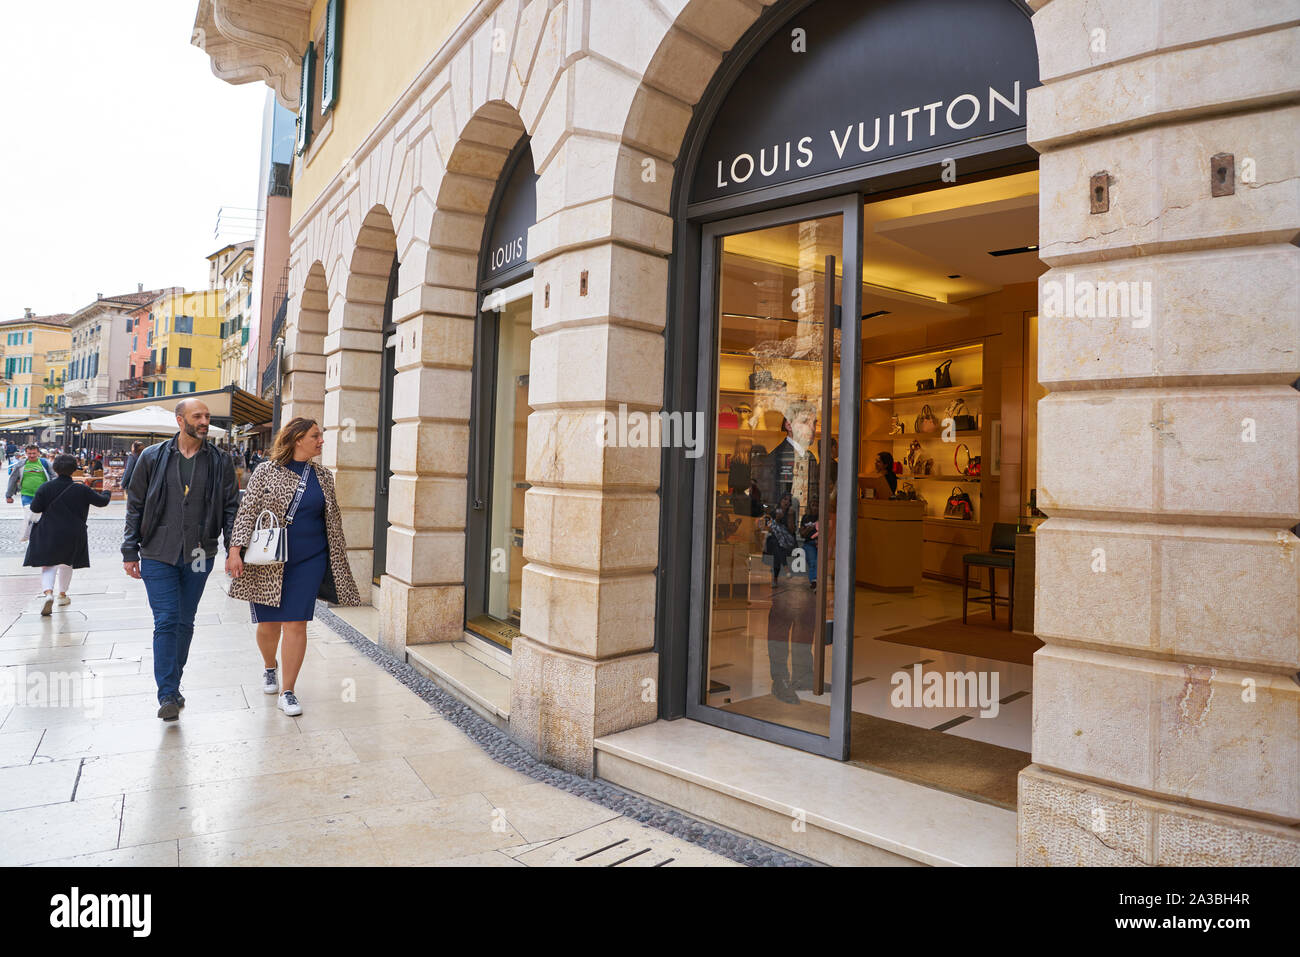 Verona Italy August 25 Outlet Louis Stock Photo 157868984